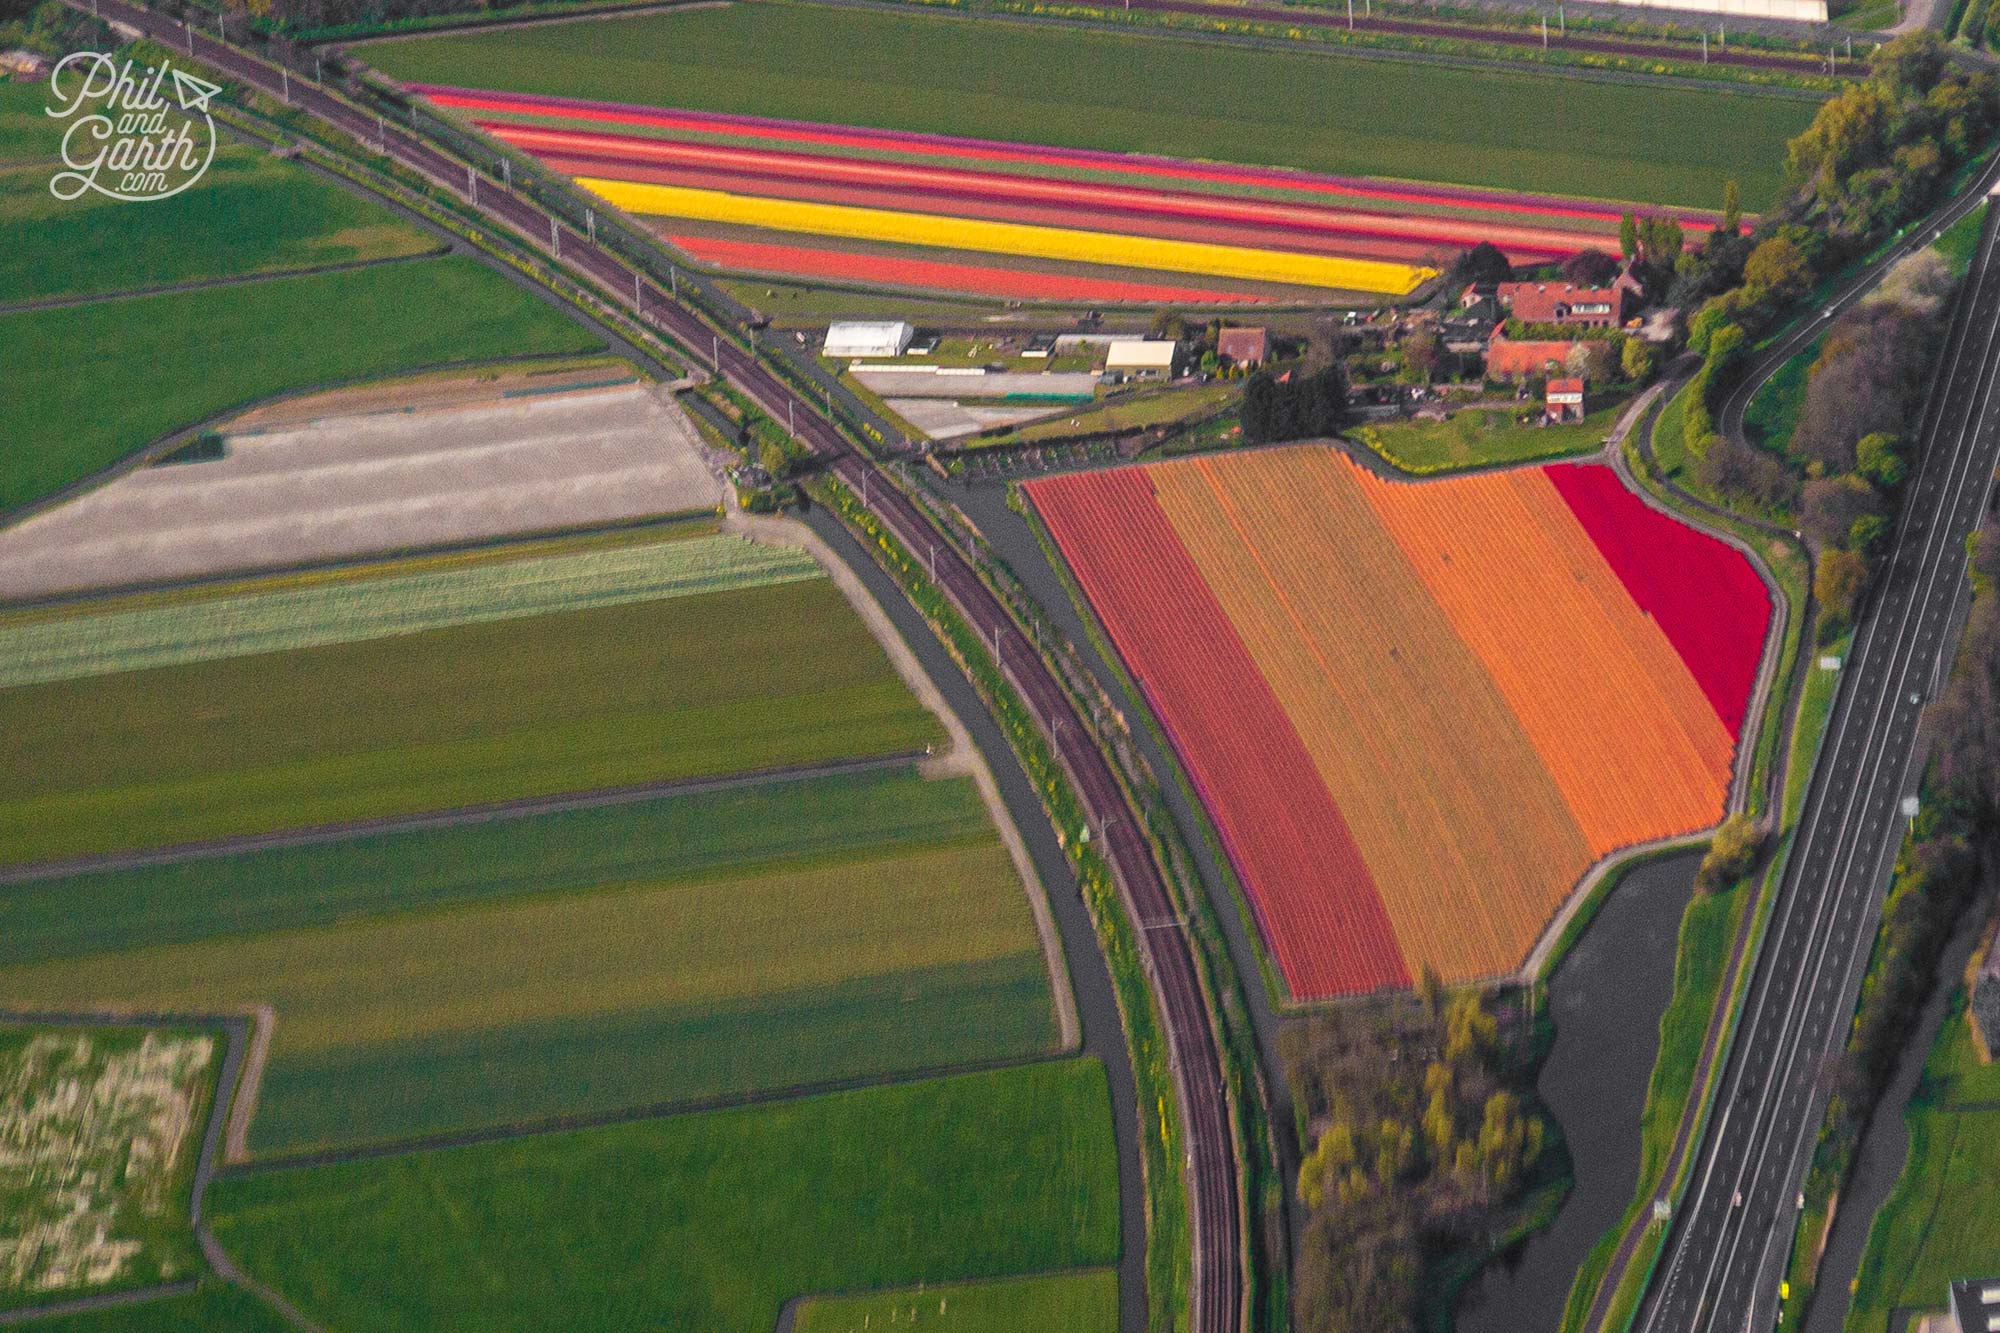 Flying over some tulip fields on our approach to Amsterdam